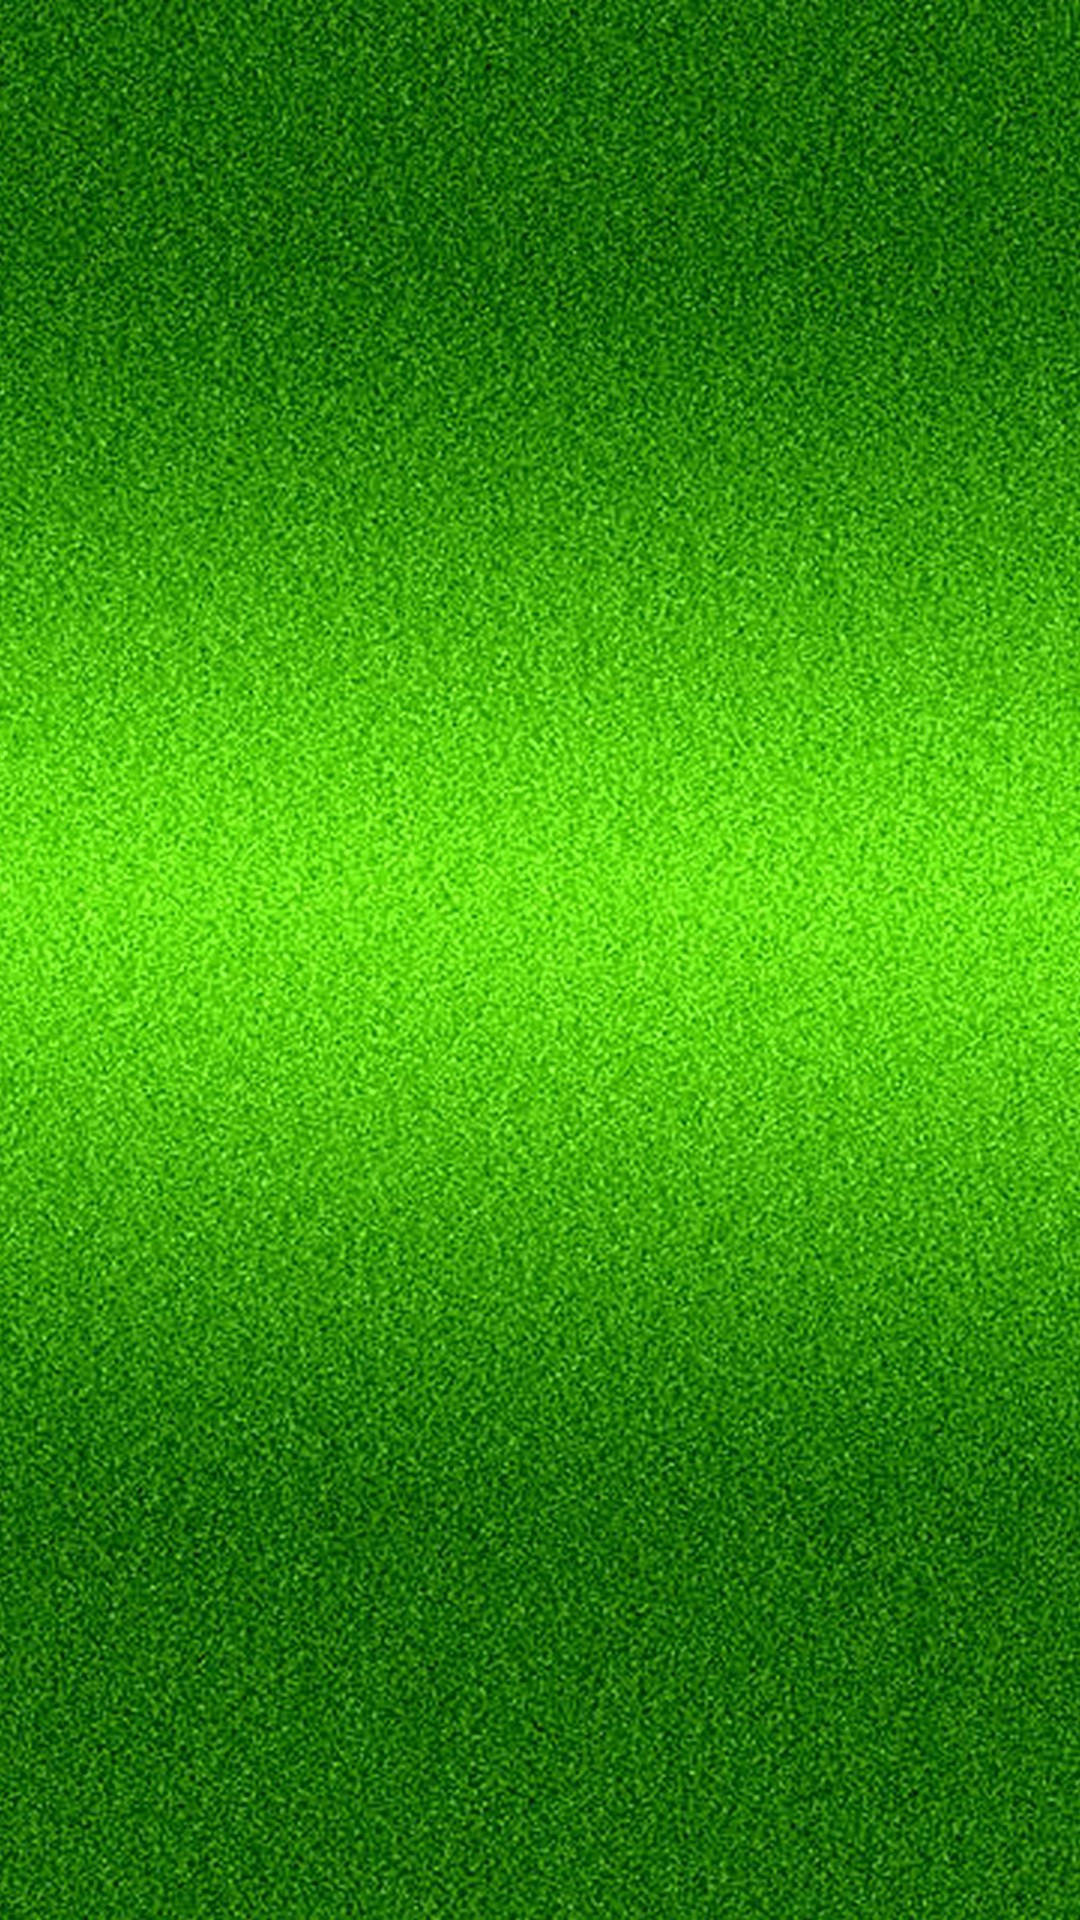 Android Wallpaper HD Green Colour with image resolution 1080x1920 pixel. You can make this wallpaper for your Android backgrounds, Tablet, Smartphones Screensavers and Mobile Phone Lock Screen